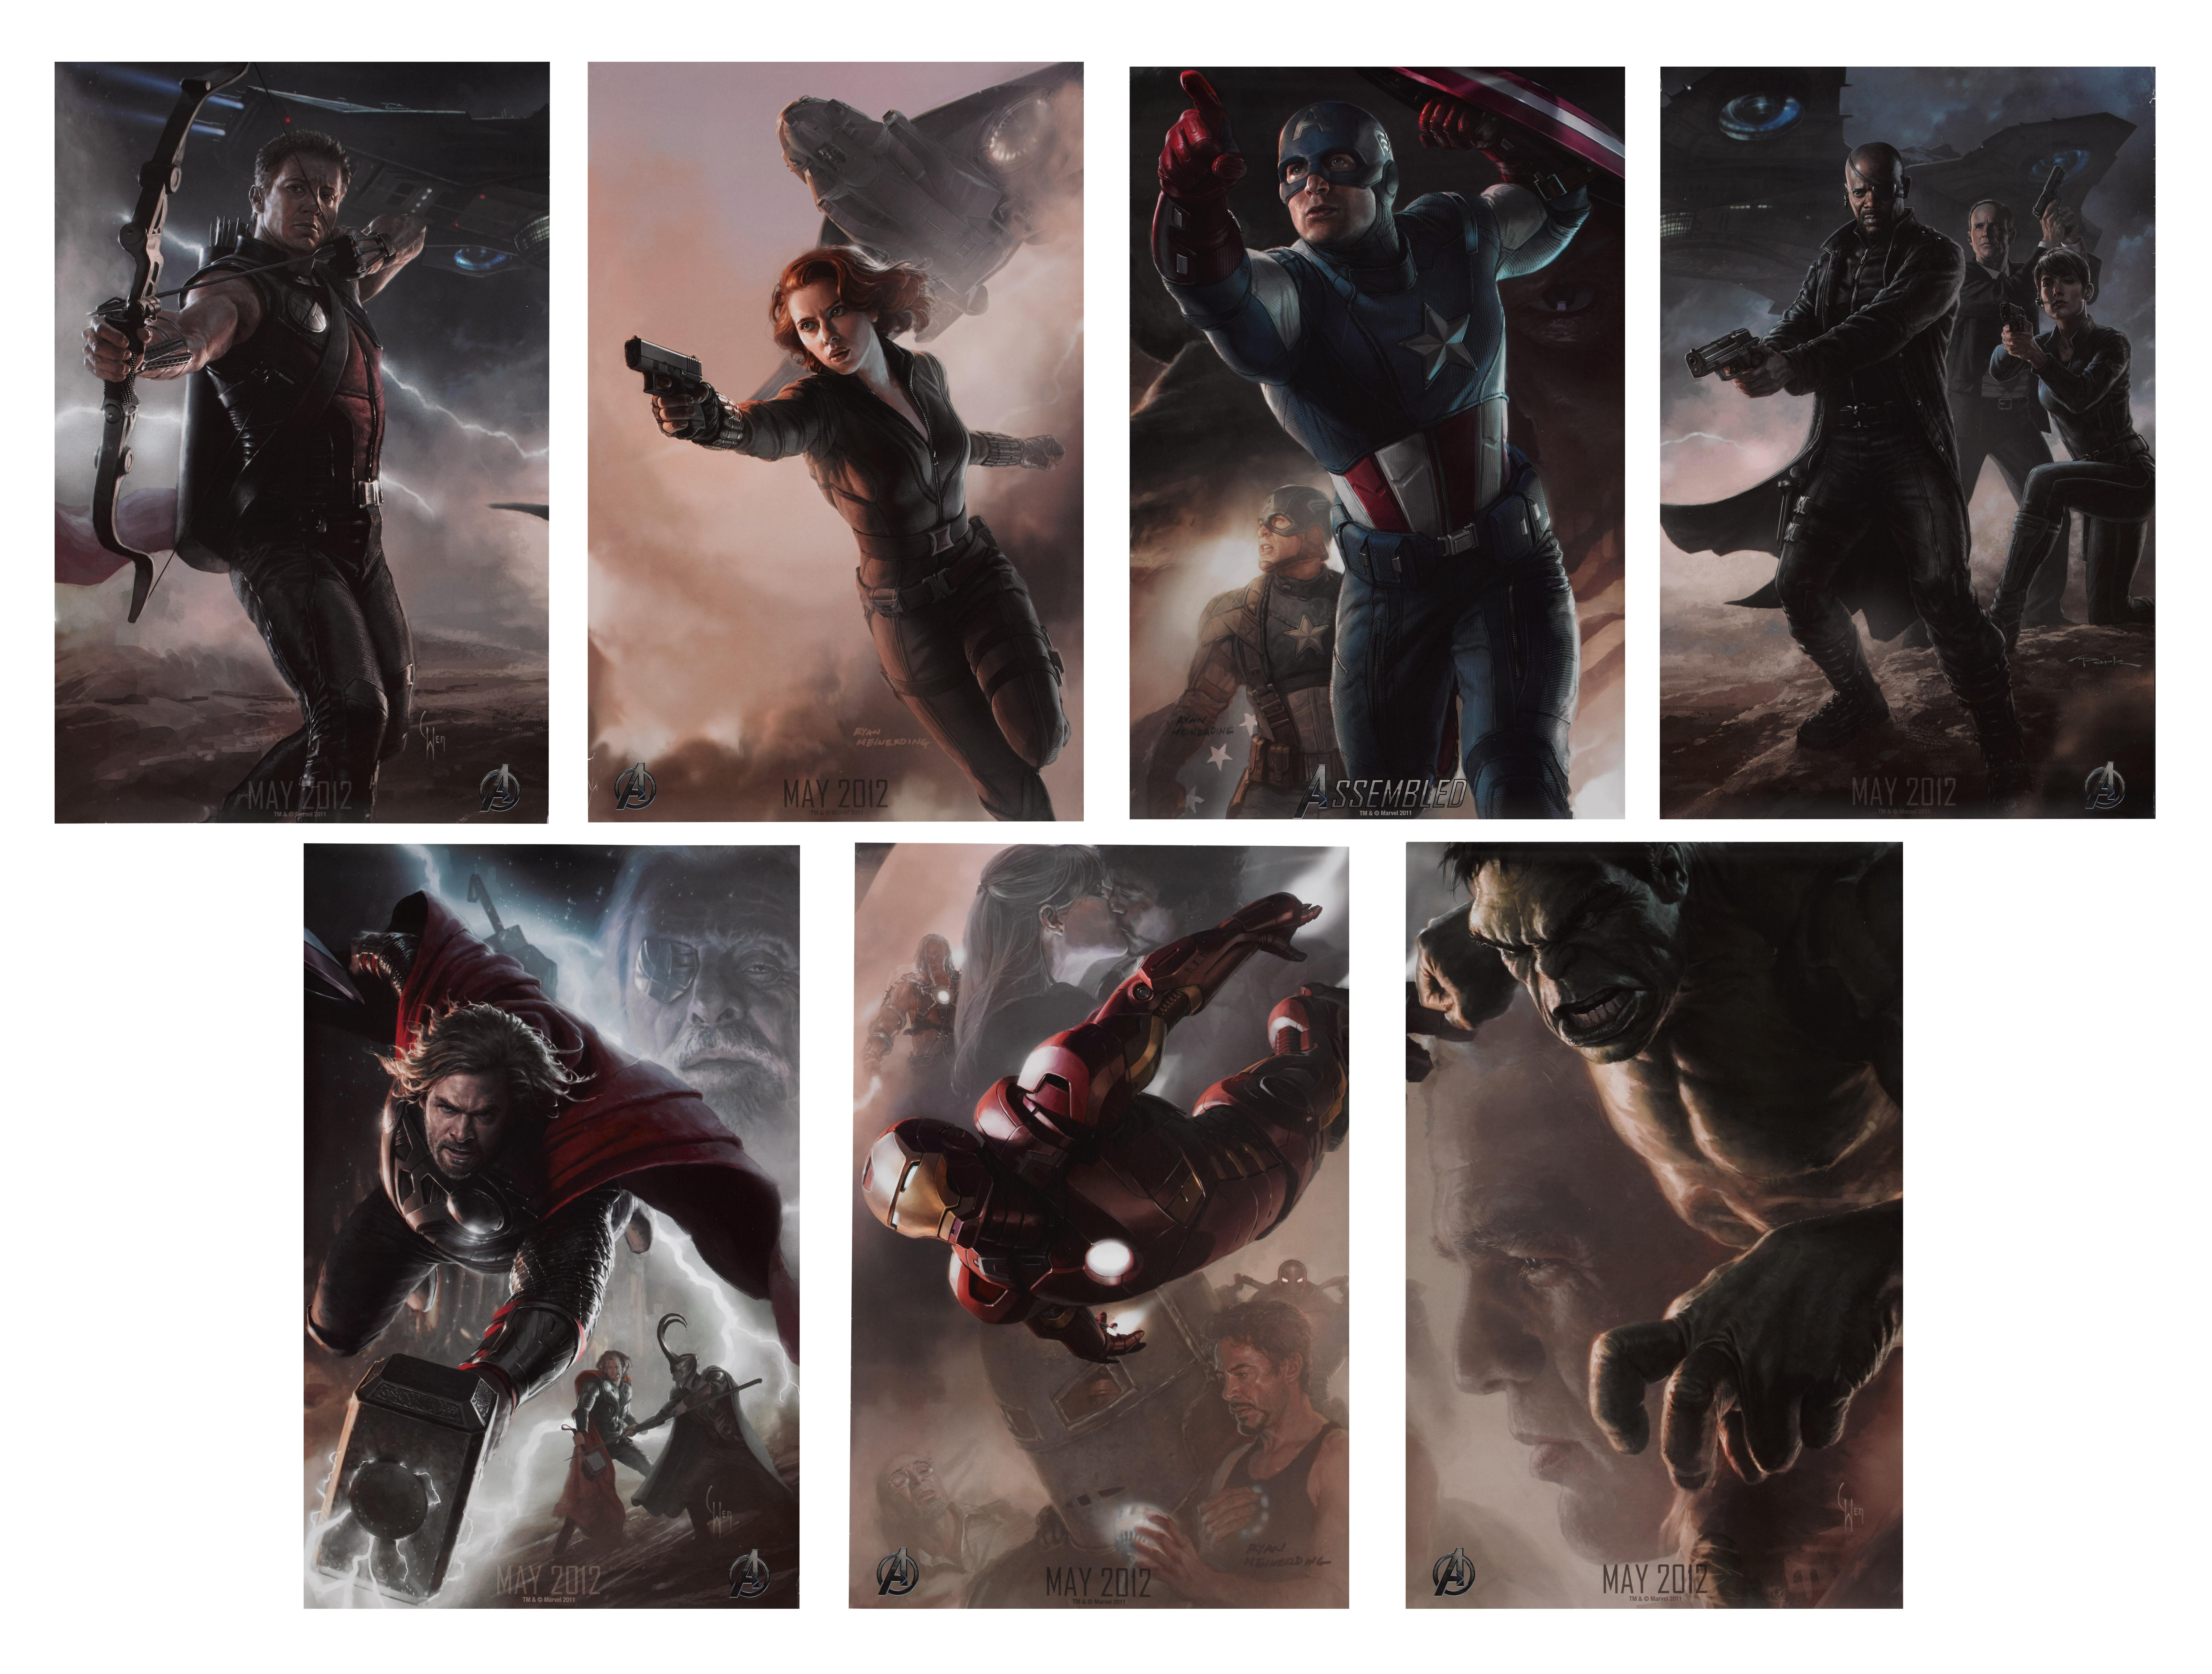 Original American set of 7 mini advance posters for the 2012 Marvel Studios film.
The film starred Rober Downey Jr, Chris Evans, Scarlet Johansson, Mark Ruffalo,
Jeremy Renner, Samuel L. Jackson, Don Cheadle and Benedict Cumberbatch.
These